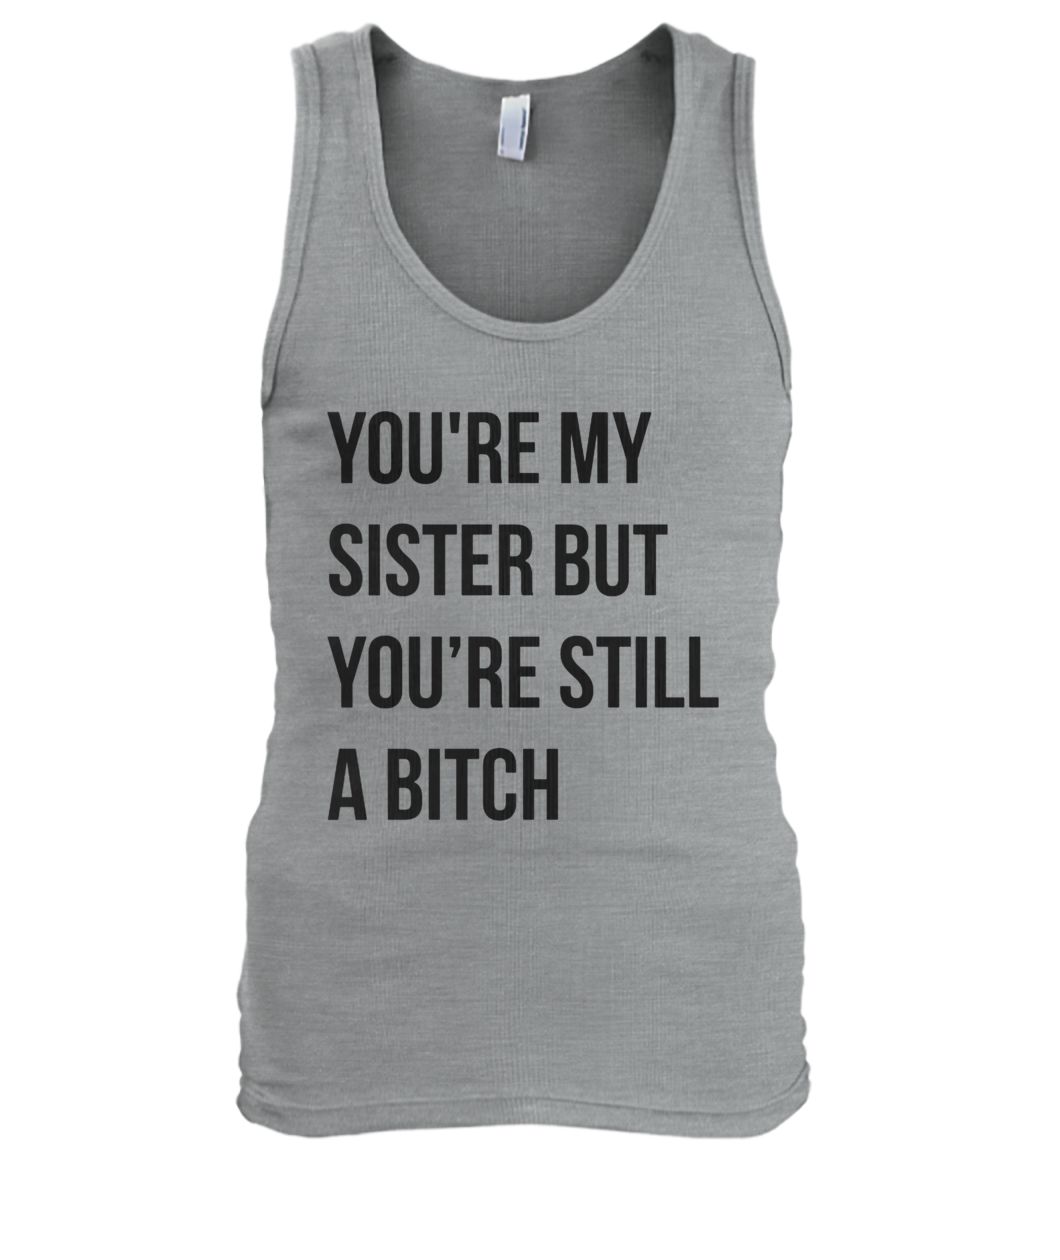 Official you're my sister but you're still a bitch men's tank top